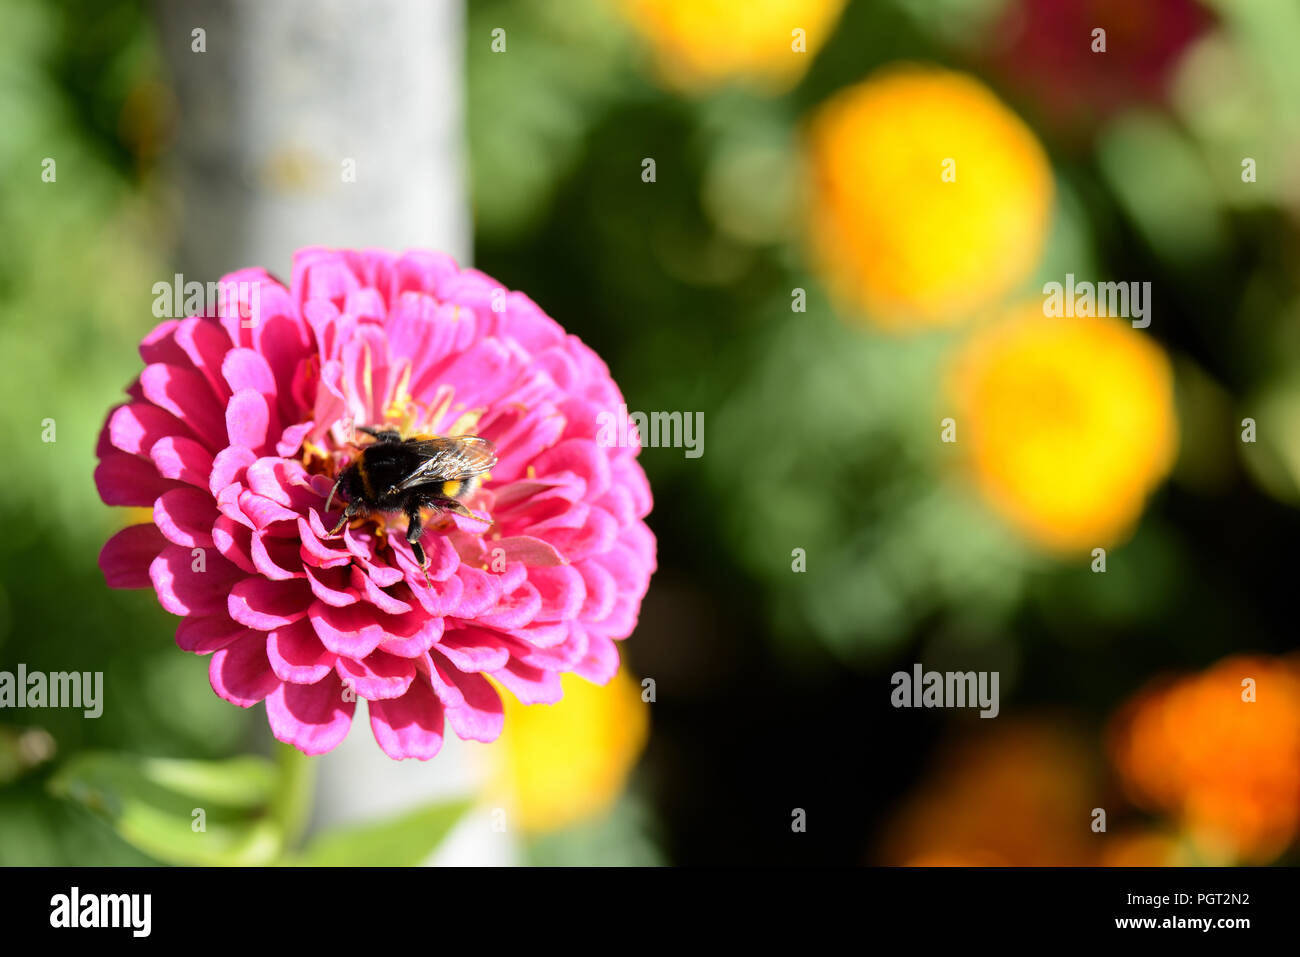 Bumblebee on a bright cynia flower in a summer garden close up Stock Photo